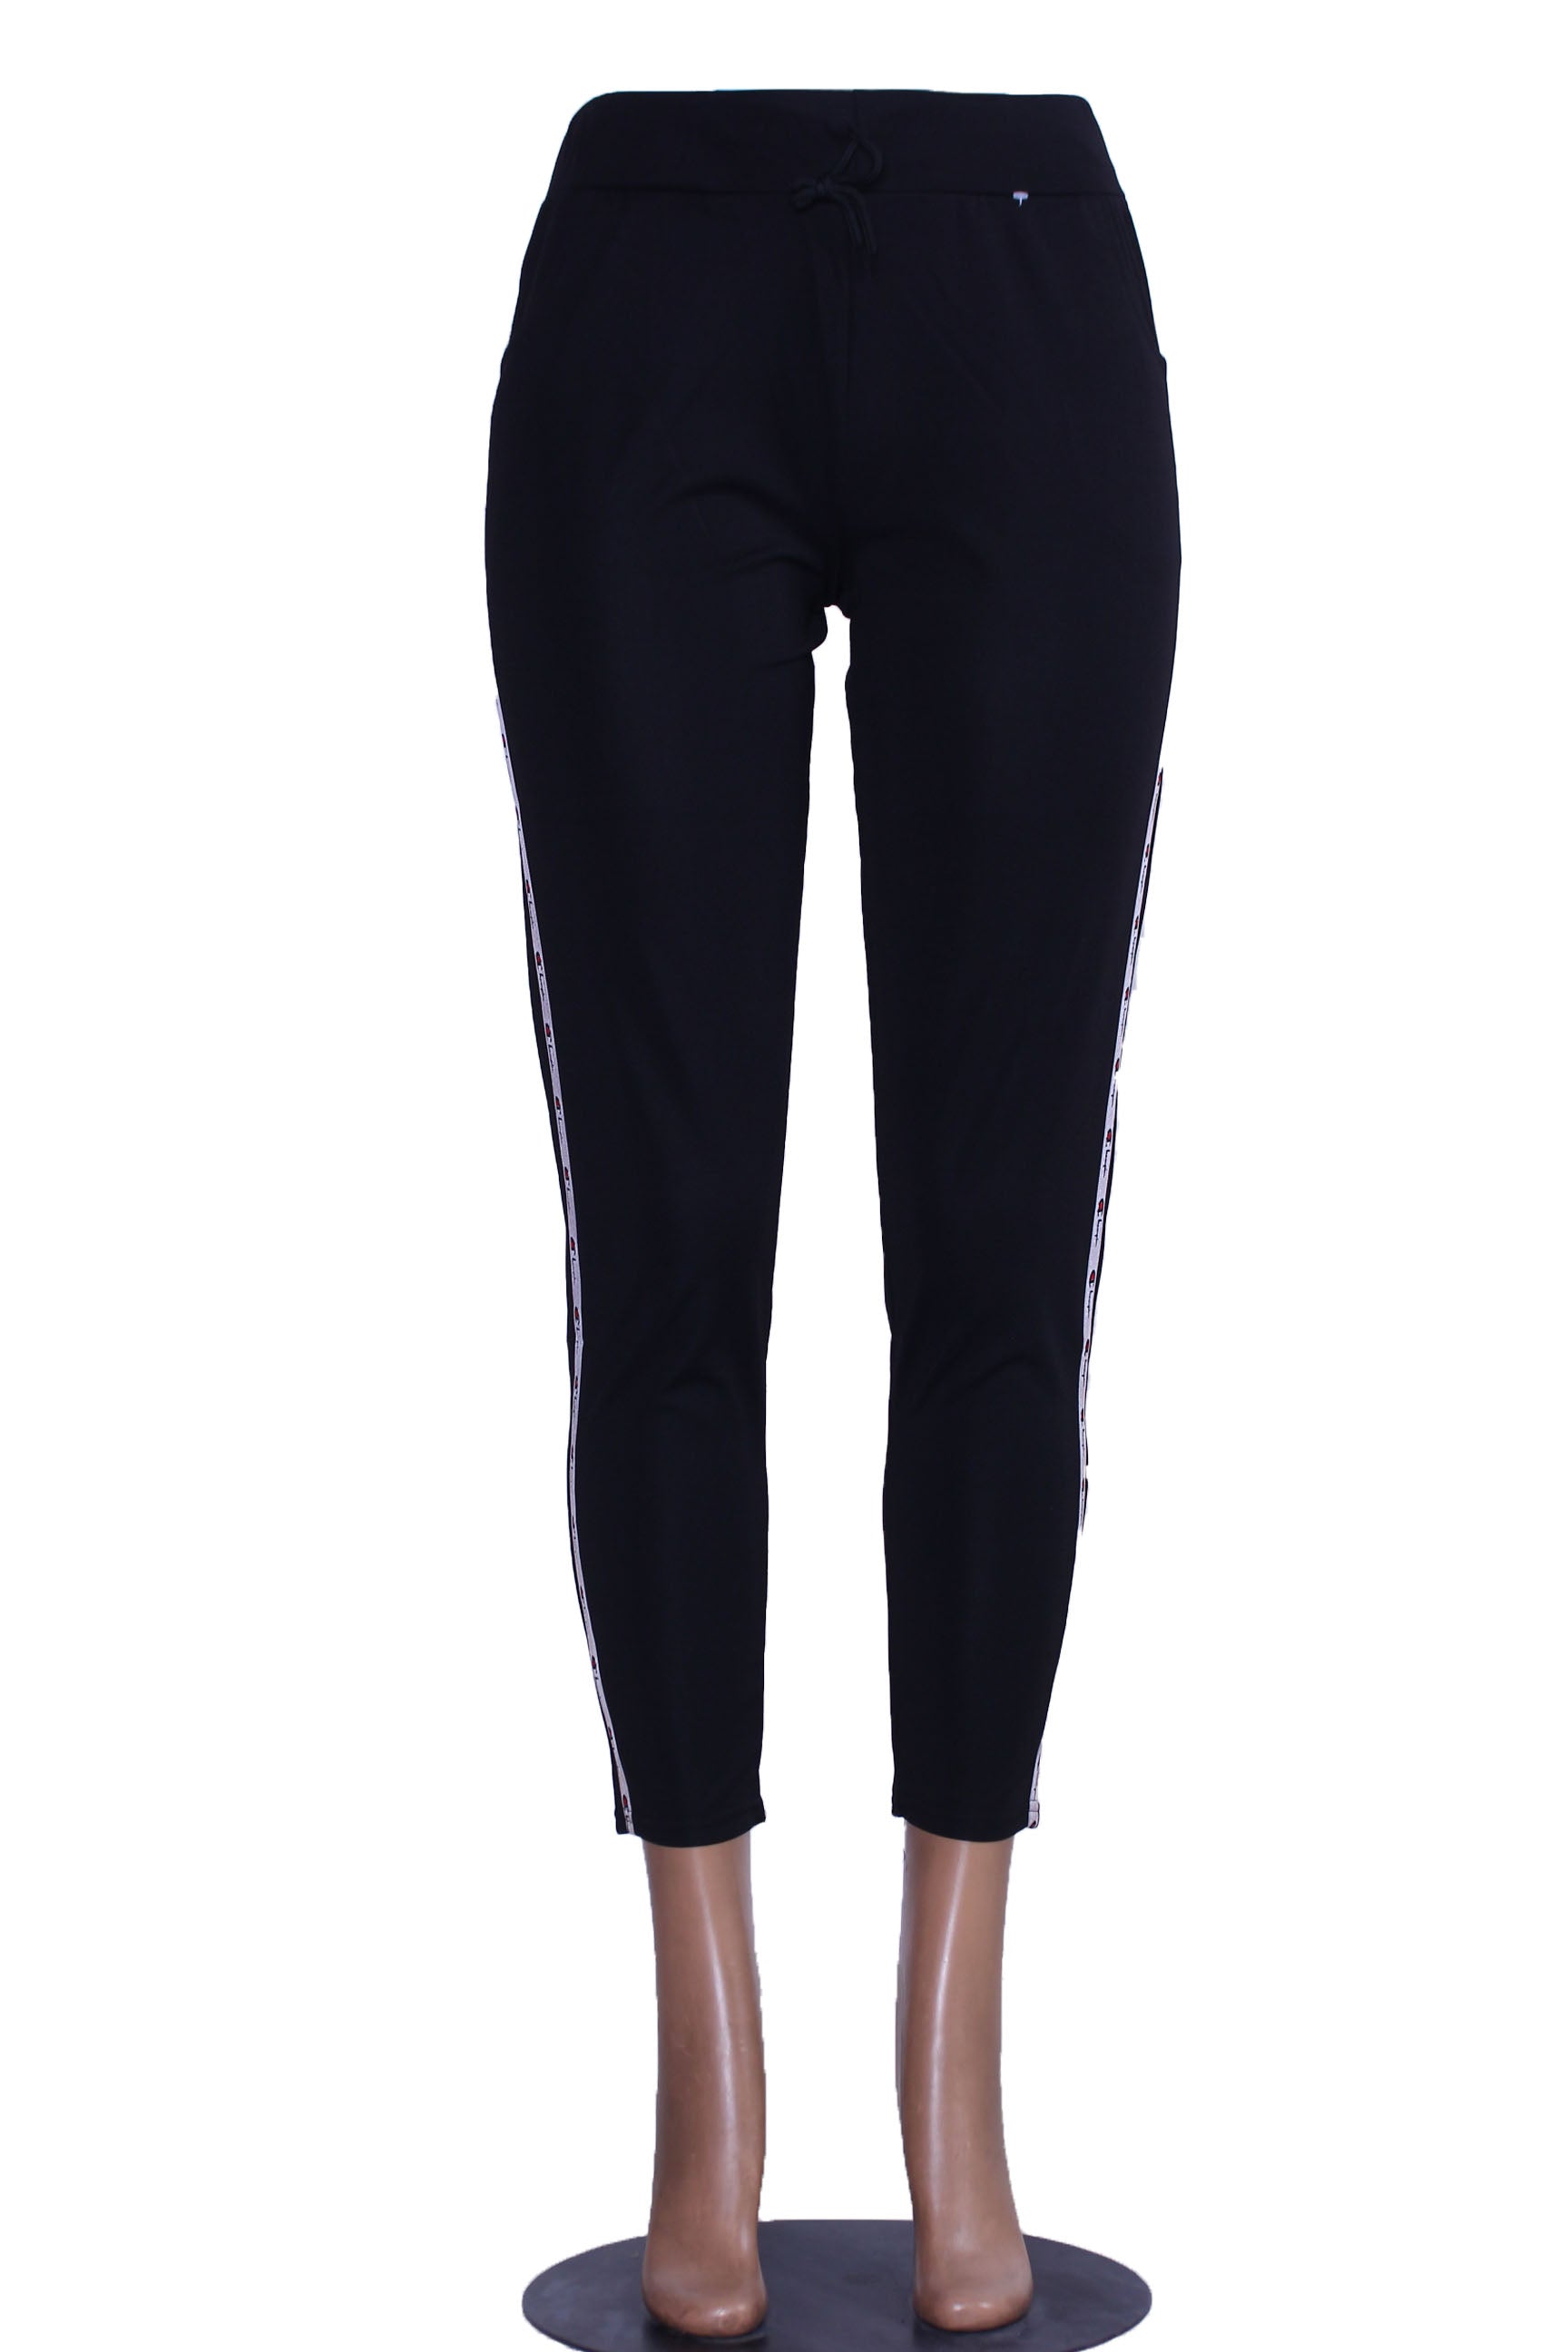 Buy Gym Trousers & Gym Pants For Ladies Online